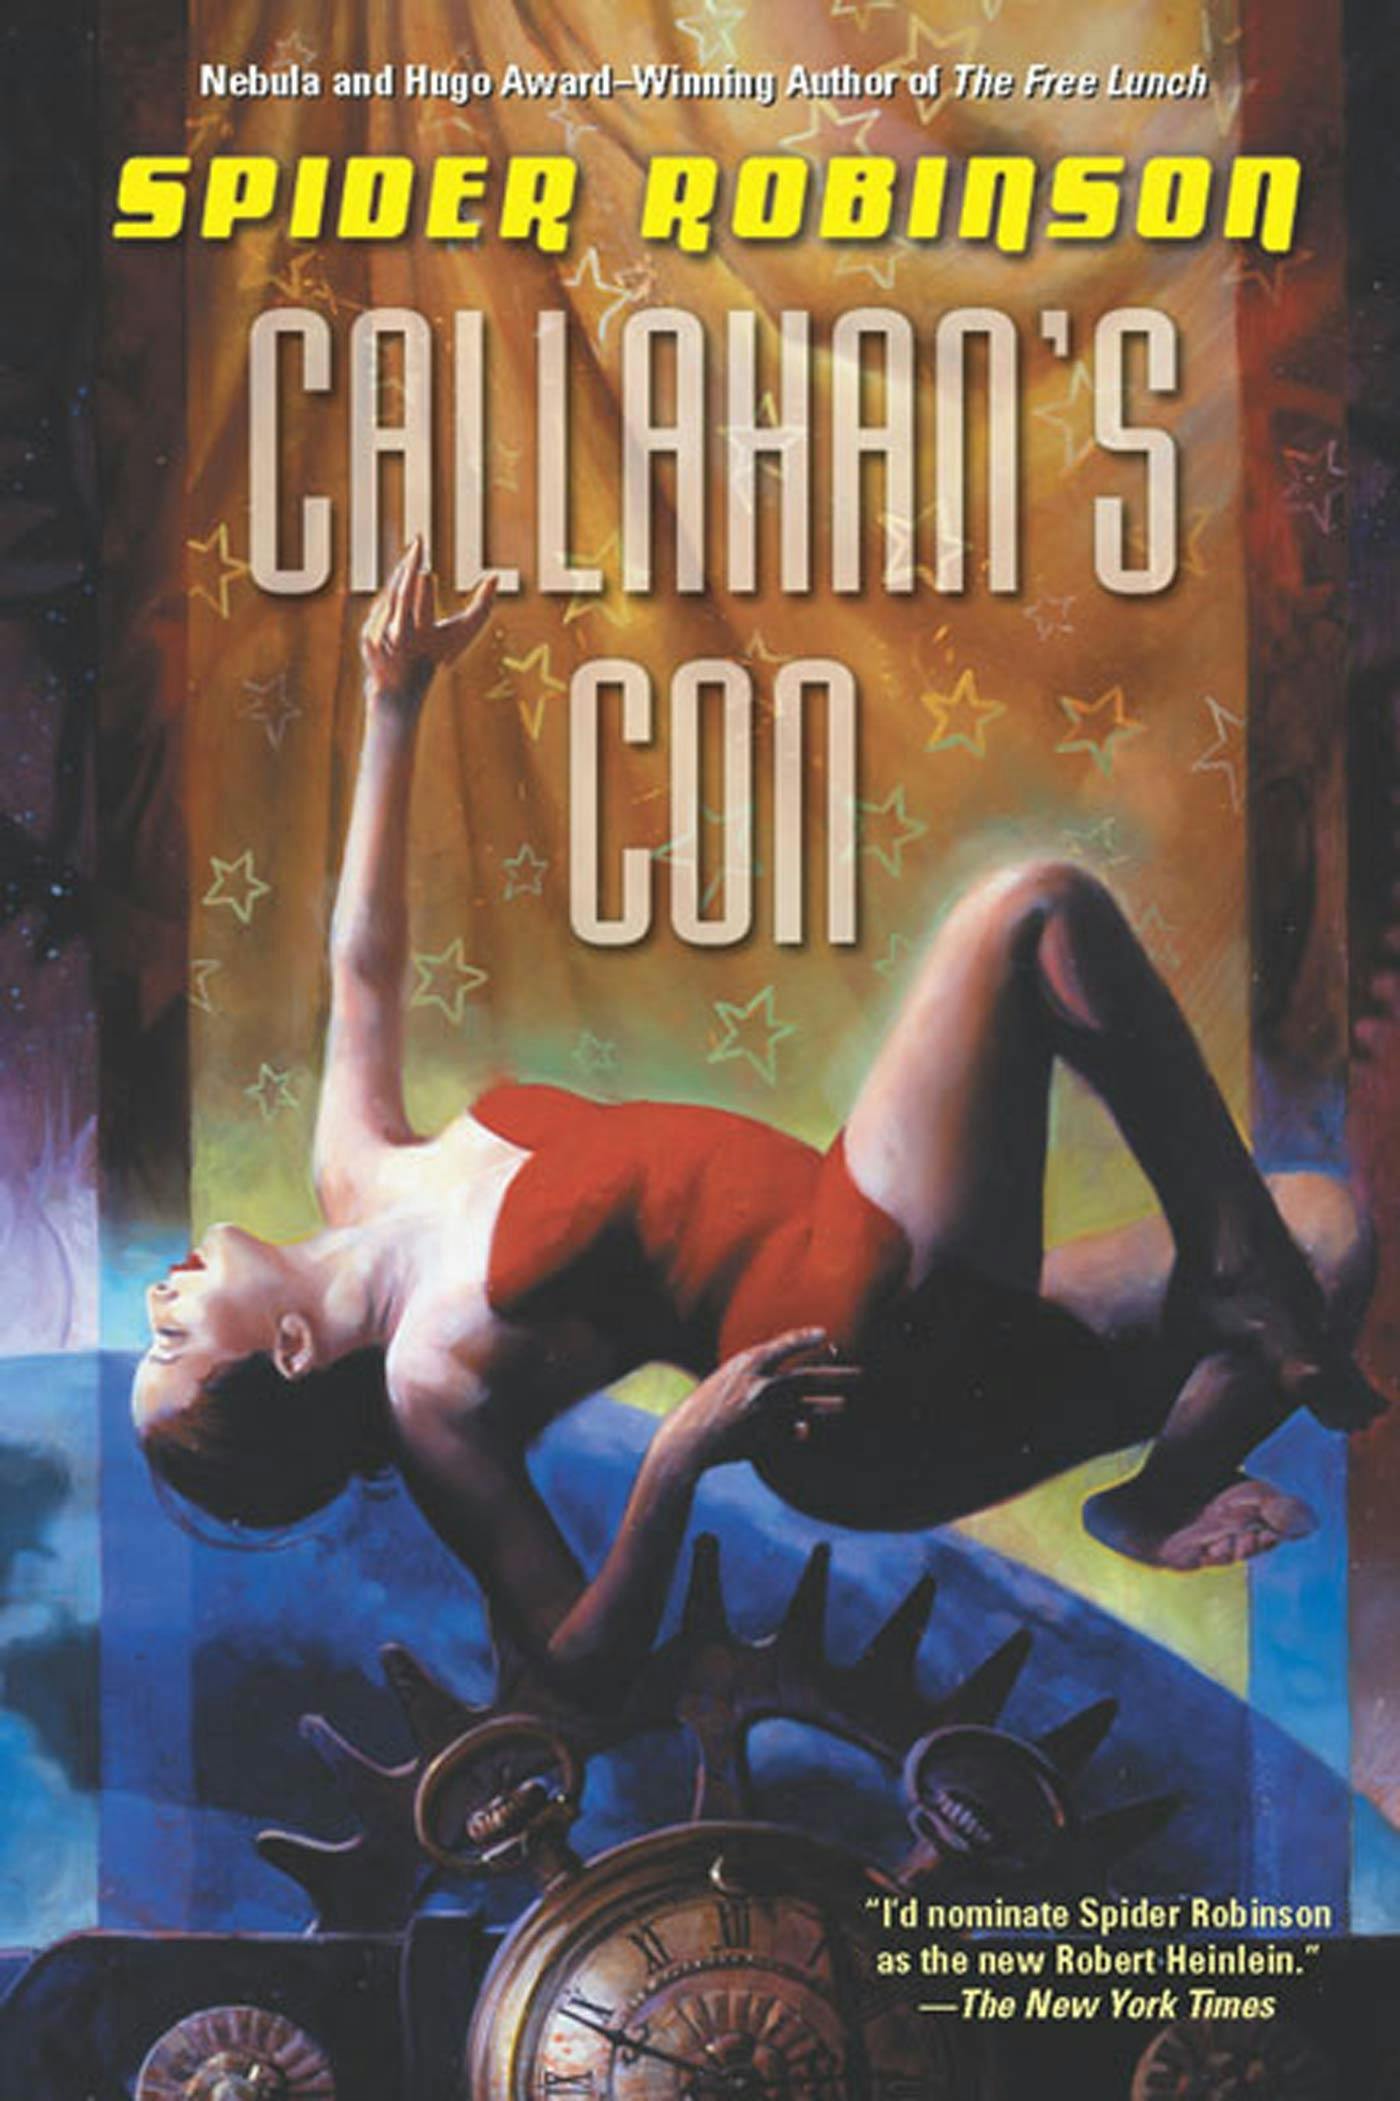 Cover for the book titled as: Callahan's Con